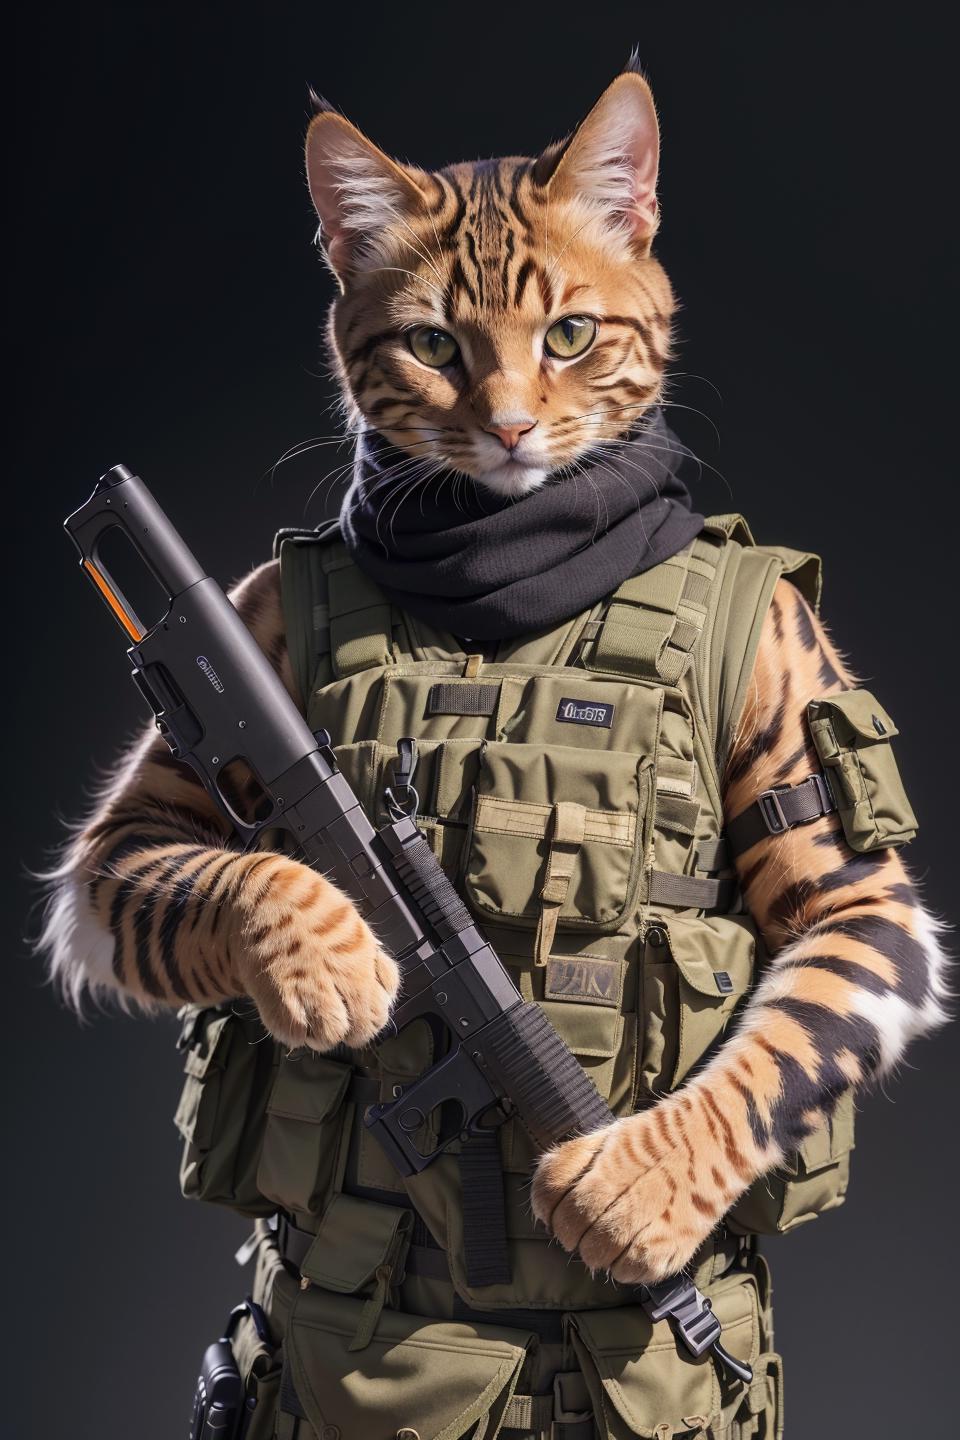 A stuffed toy cat wearing a military uniform and holding a gun.